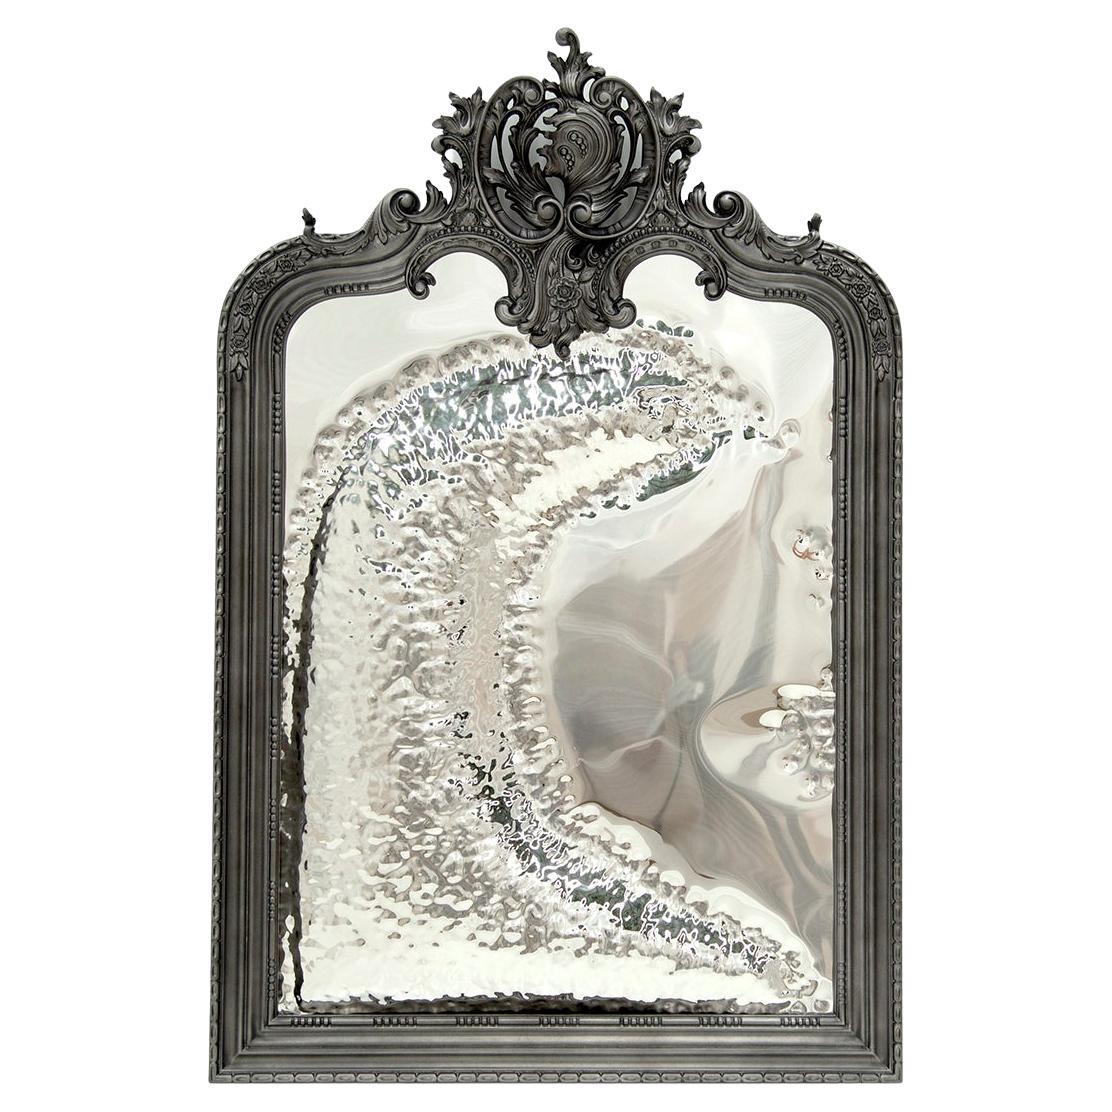 Modern Classic Imaginarium Wall Mirror in Black Carved Wood and Polished Inox